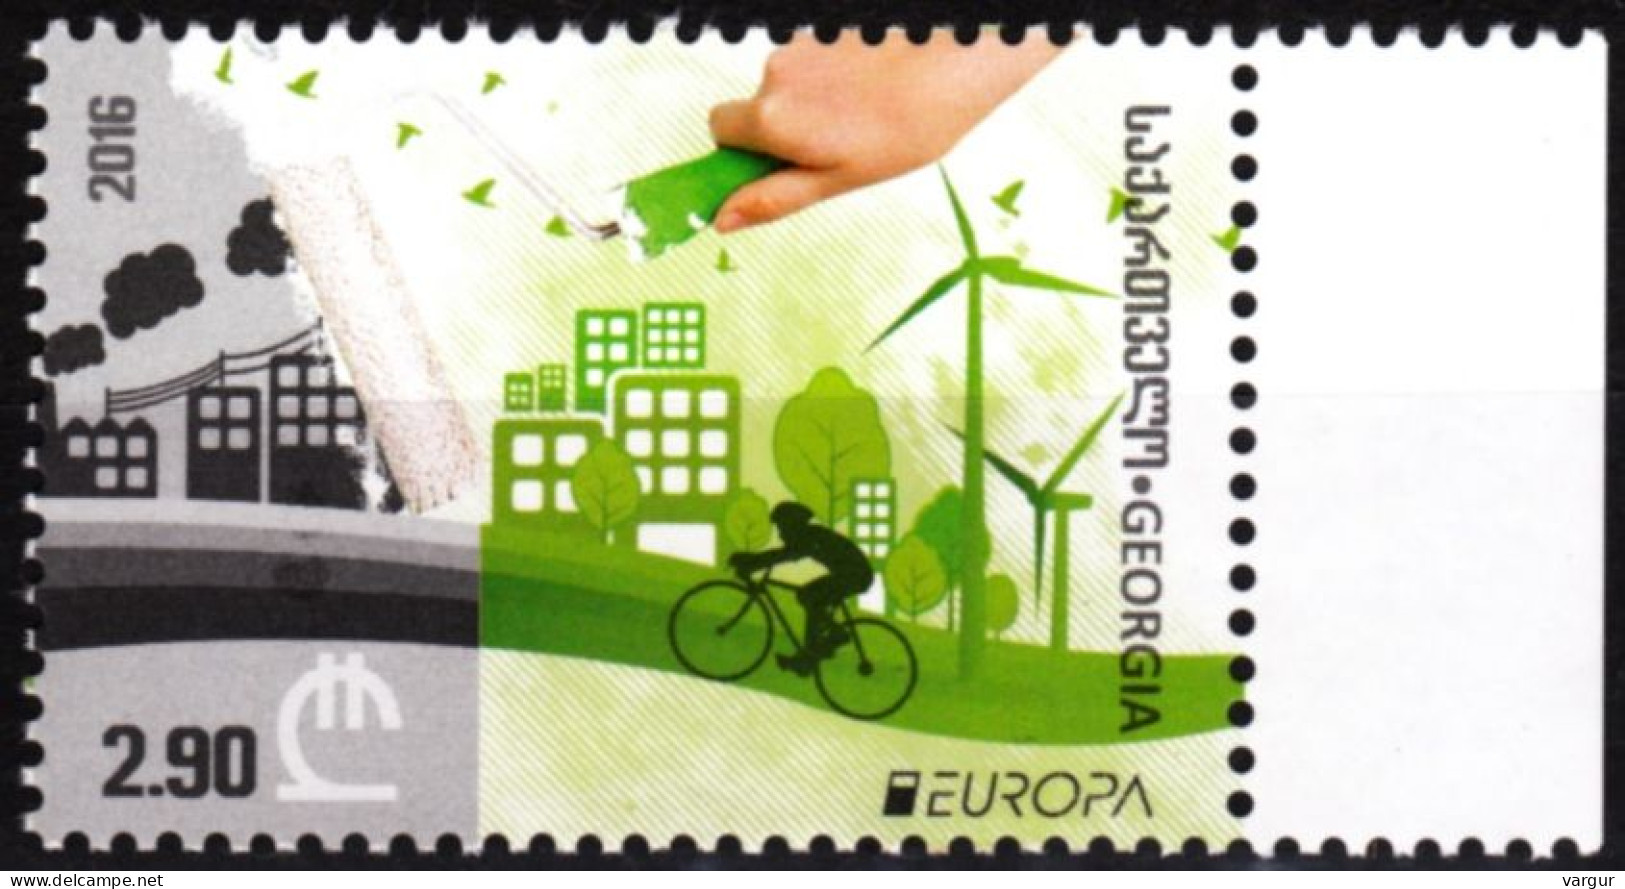 GEORGIA 2016-05 EUROPA: Think Green. Environment, Pollution, Bicycle, MNH - 2016